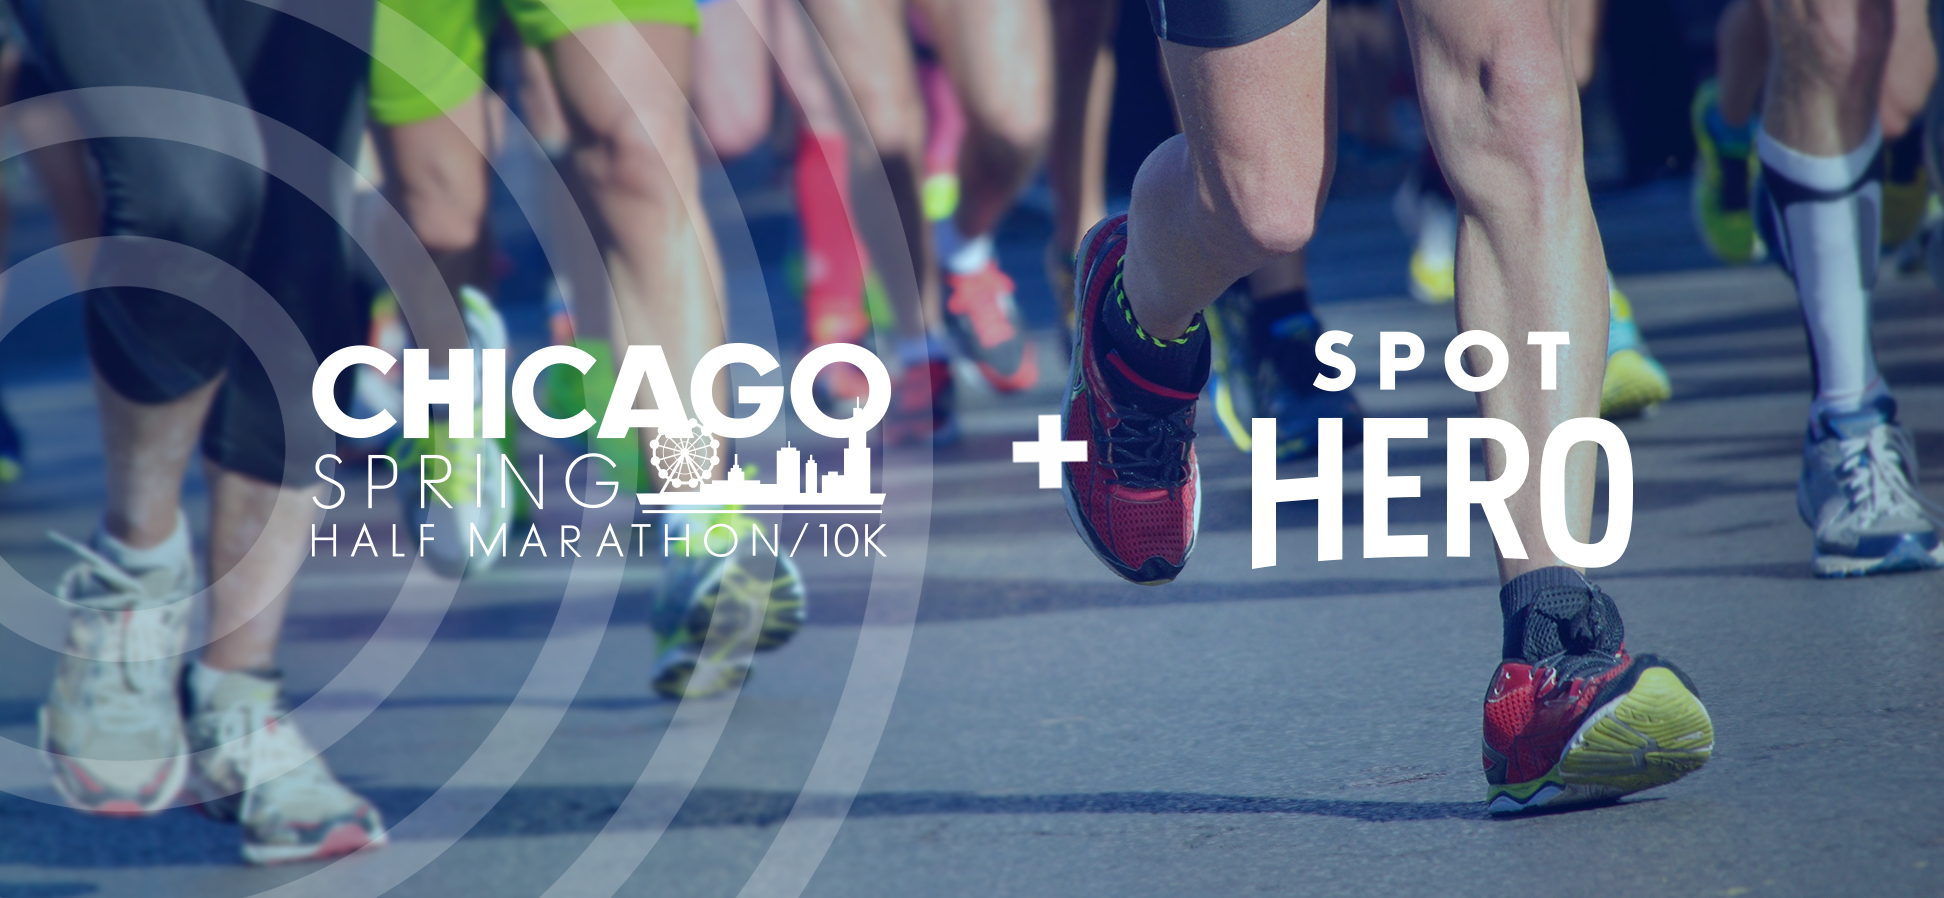 5 Things to Know for the Chicago Spring Half Marathon: Parking, Course Info & More